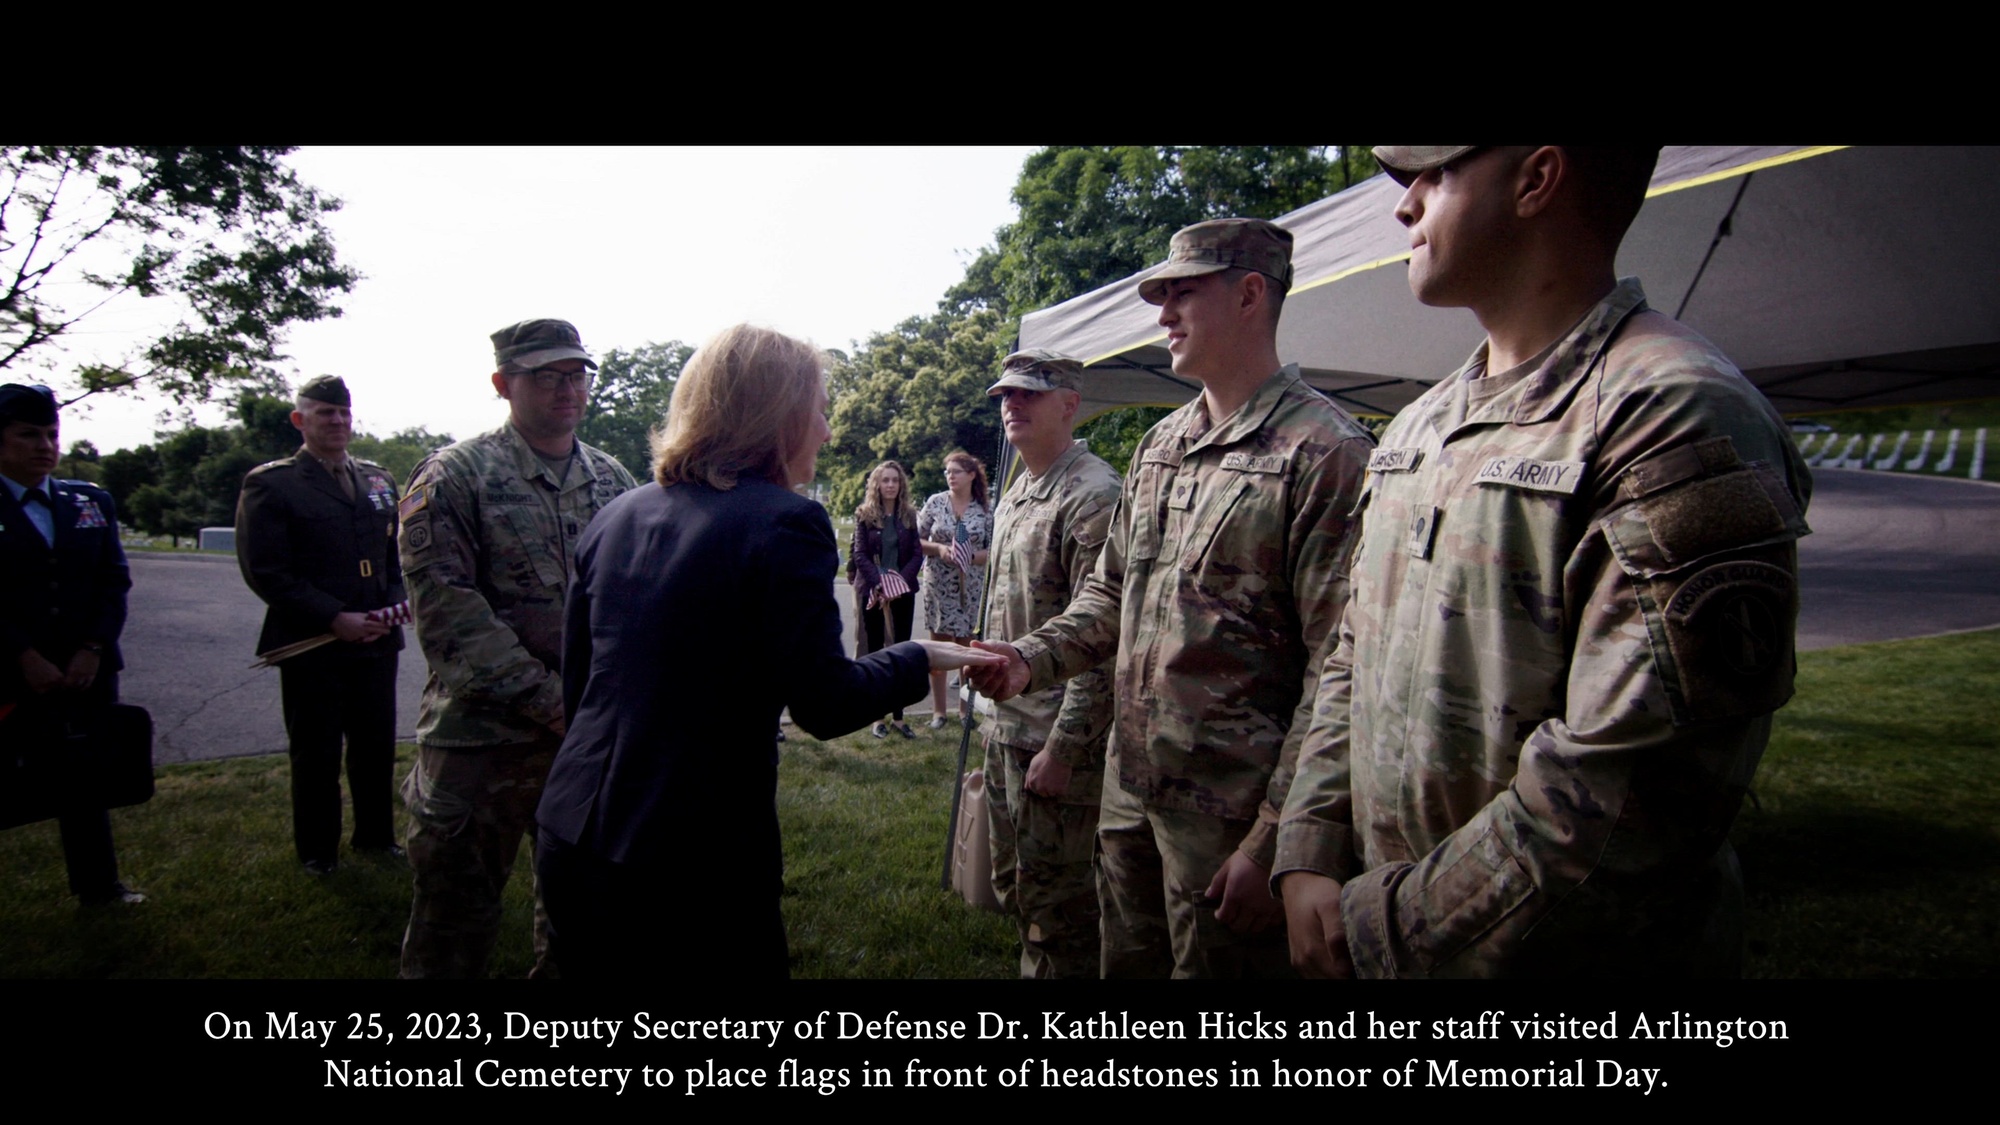 On May 25, Deputy Secretary of Defense Dr. Kathleen Hicks and her staff visited Arlington National Cemetery to place flags at the base of headstones in honor of Memorial Day.